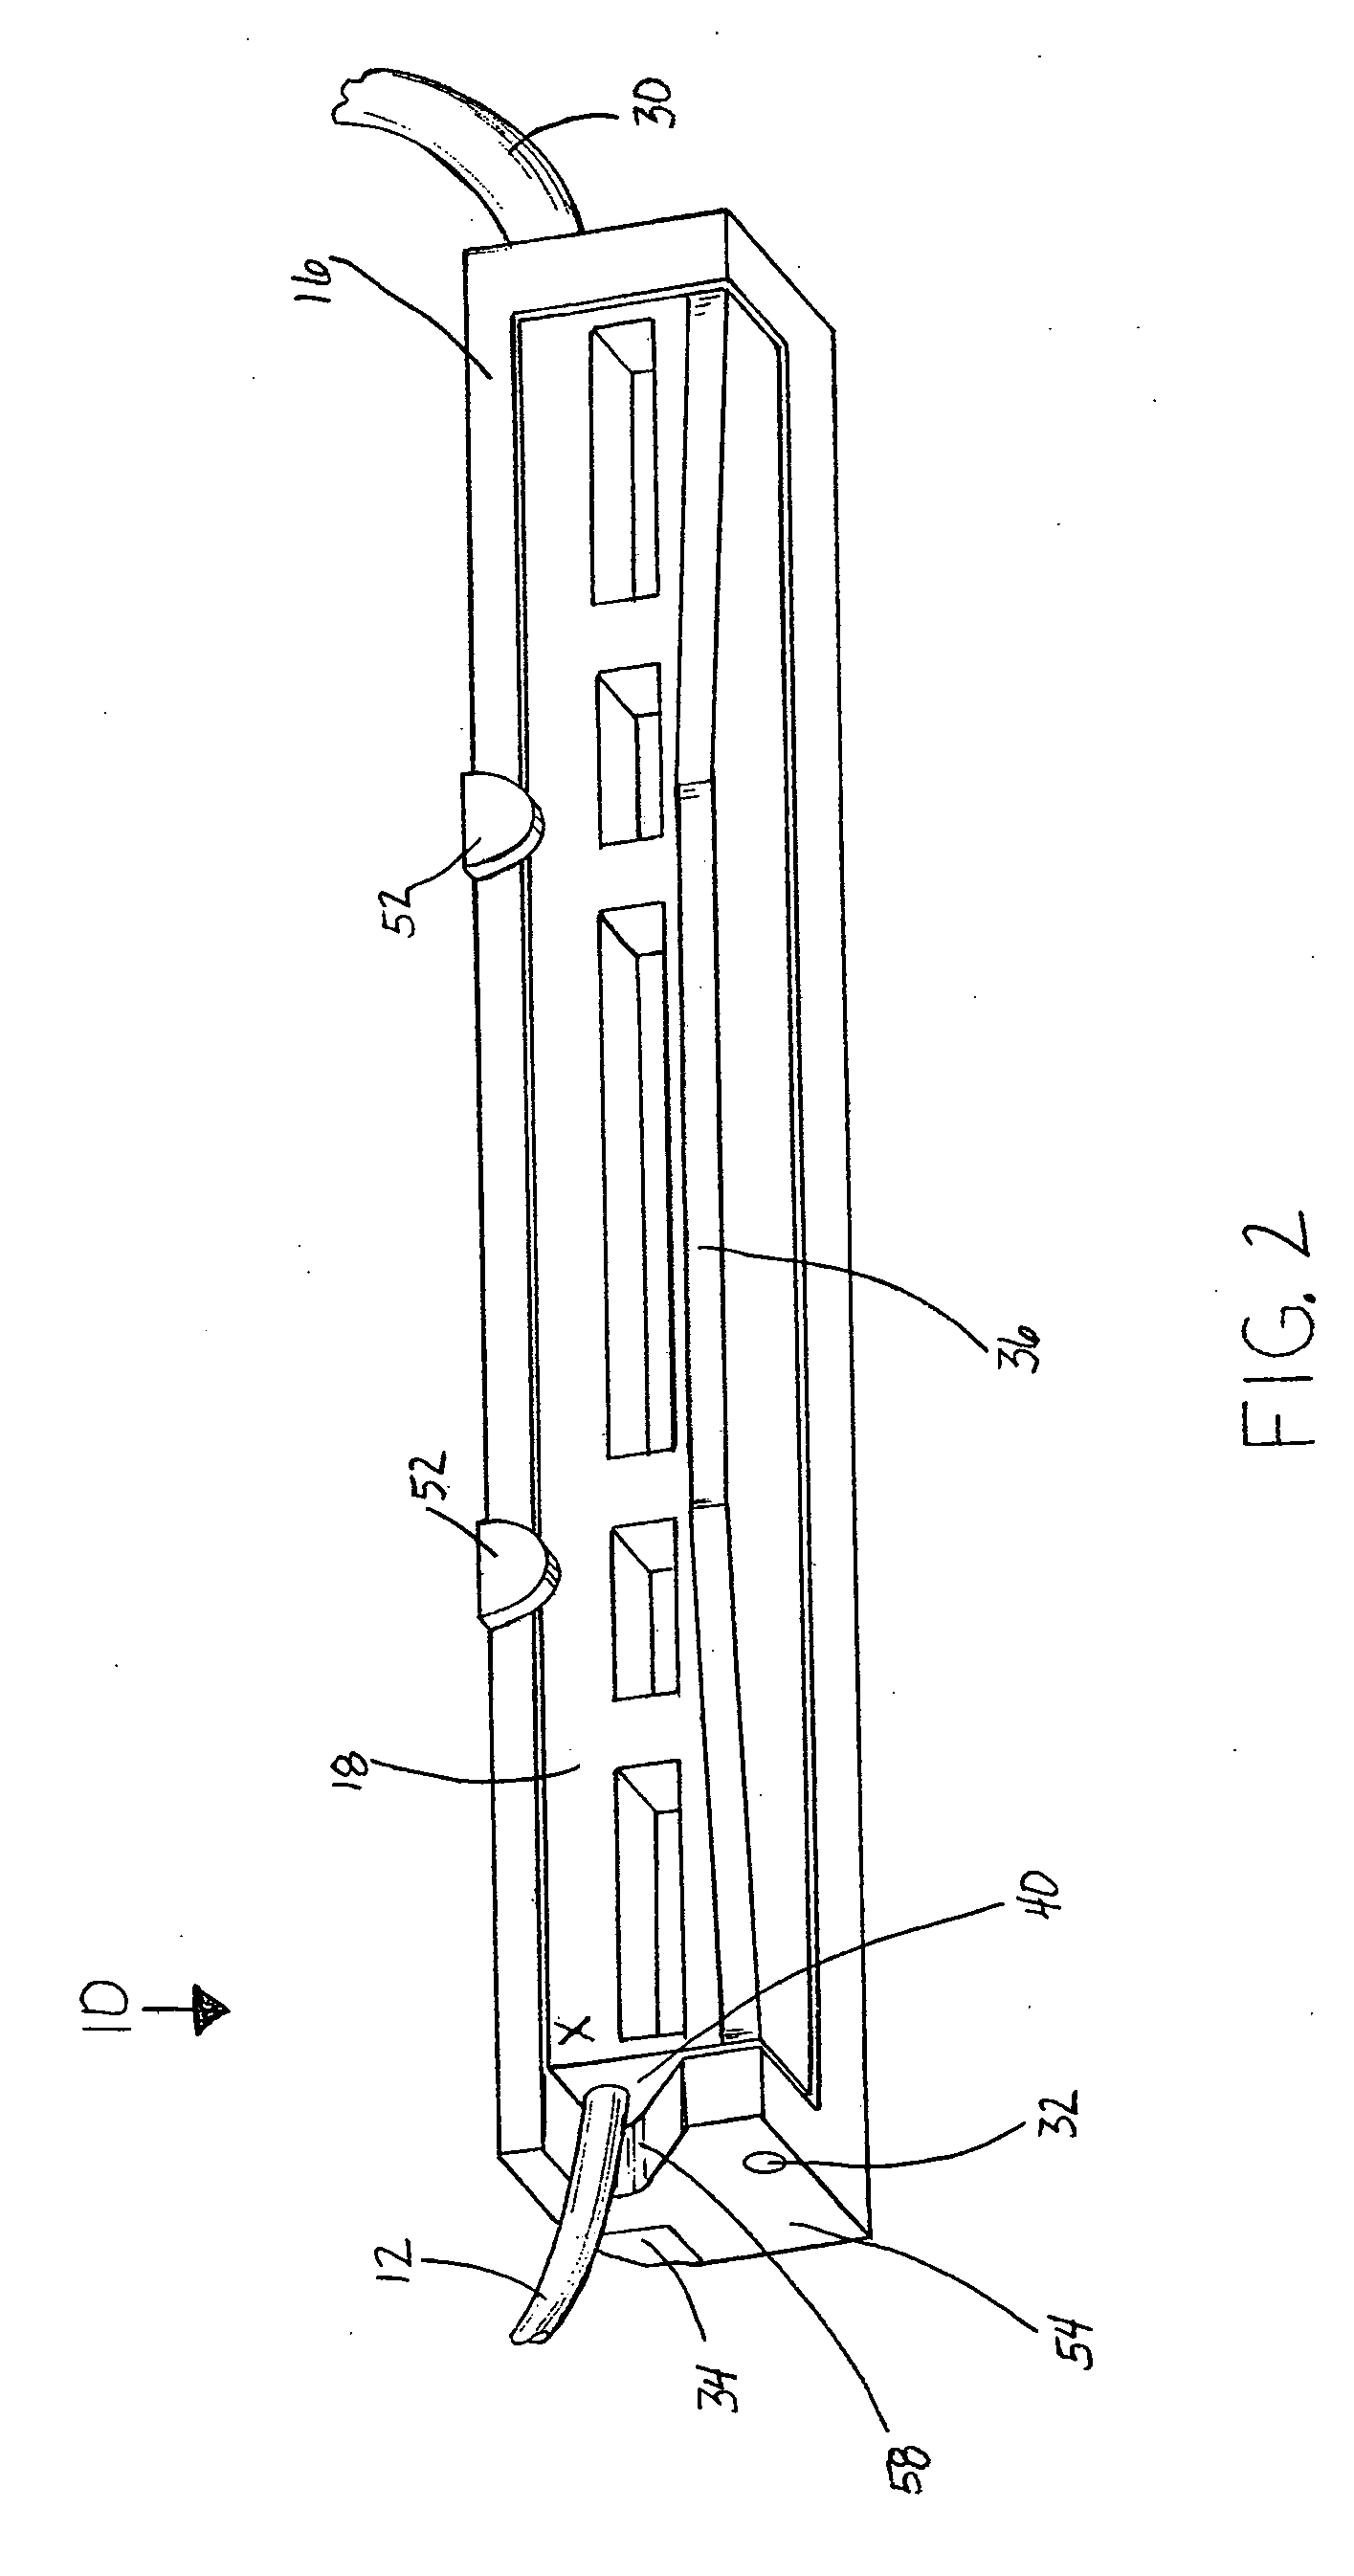 Electrical Connector with Canopy for an In-Body Multi-Contact Medical Electrode Device